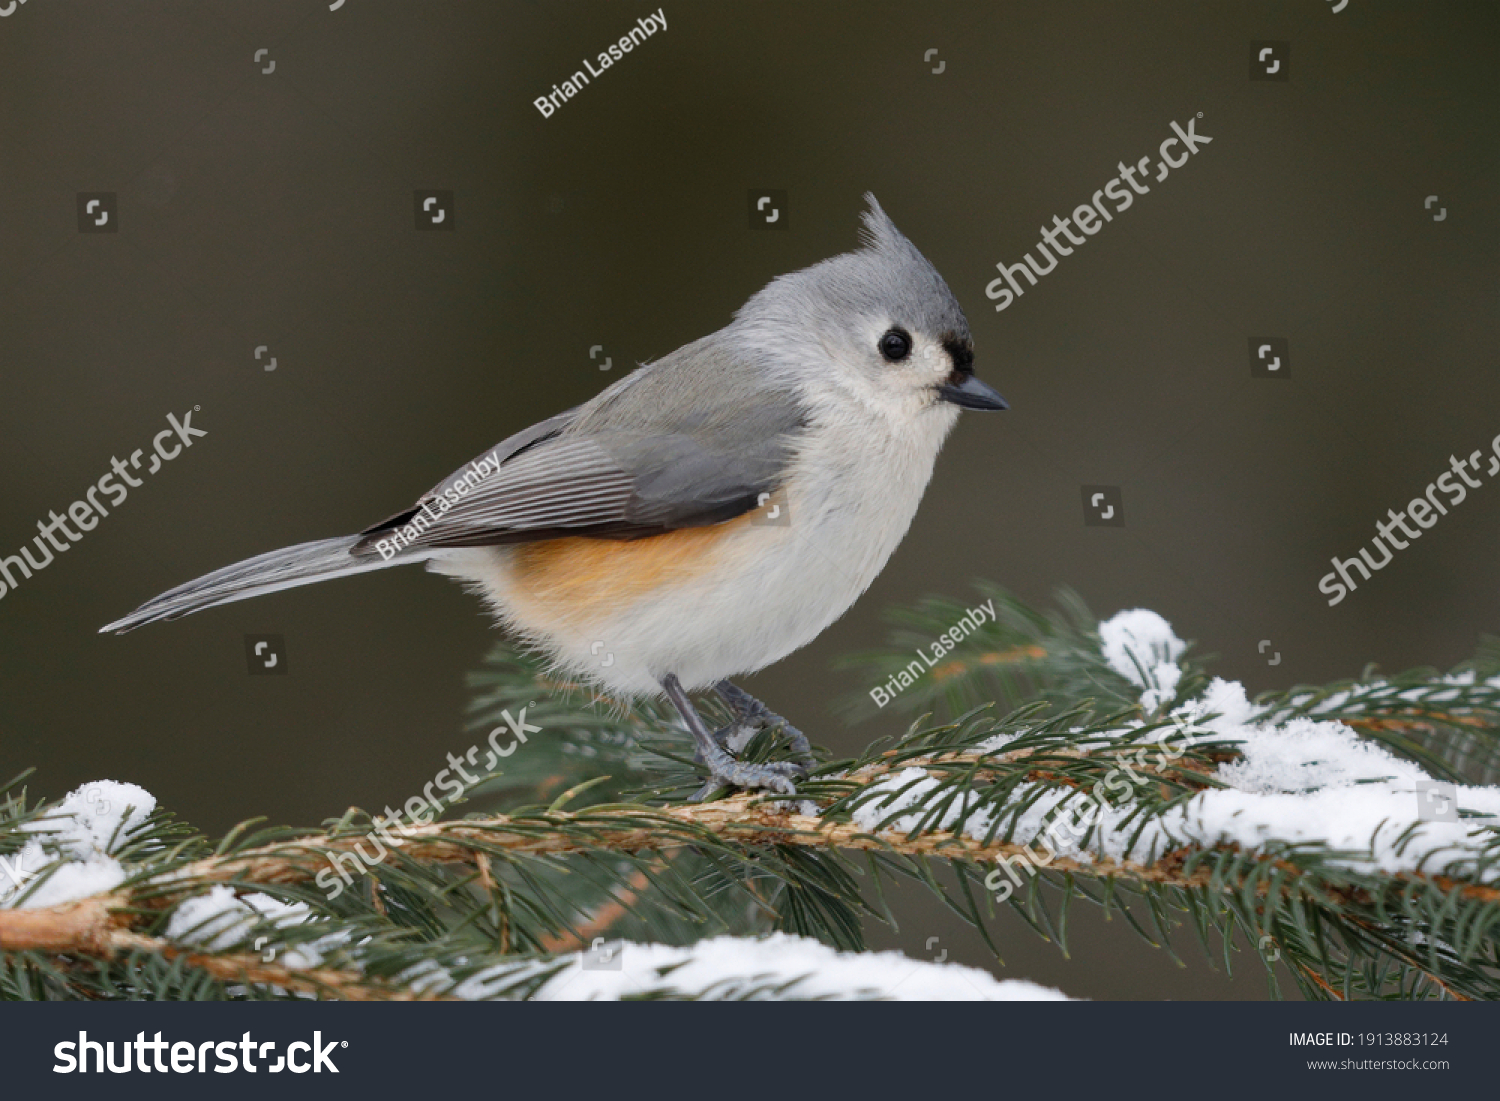 Tufted Titmouse (Baeolophus bicolor) perched on a spruce branch in winter - Grand Bend, Ontario, Canada #1913883124